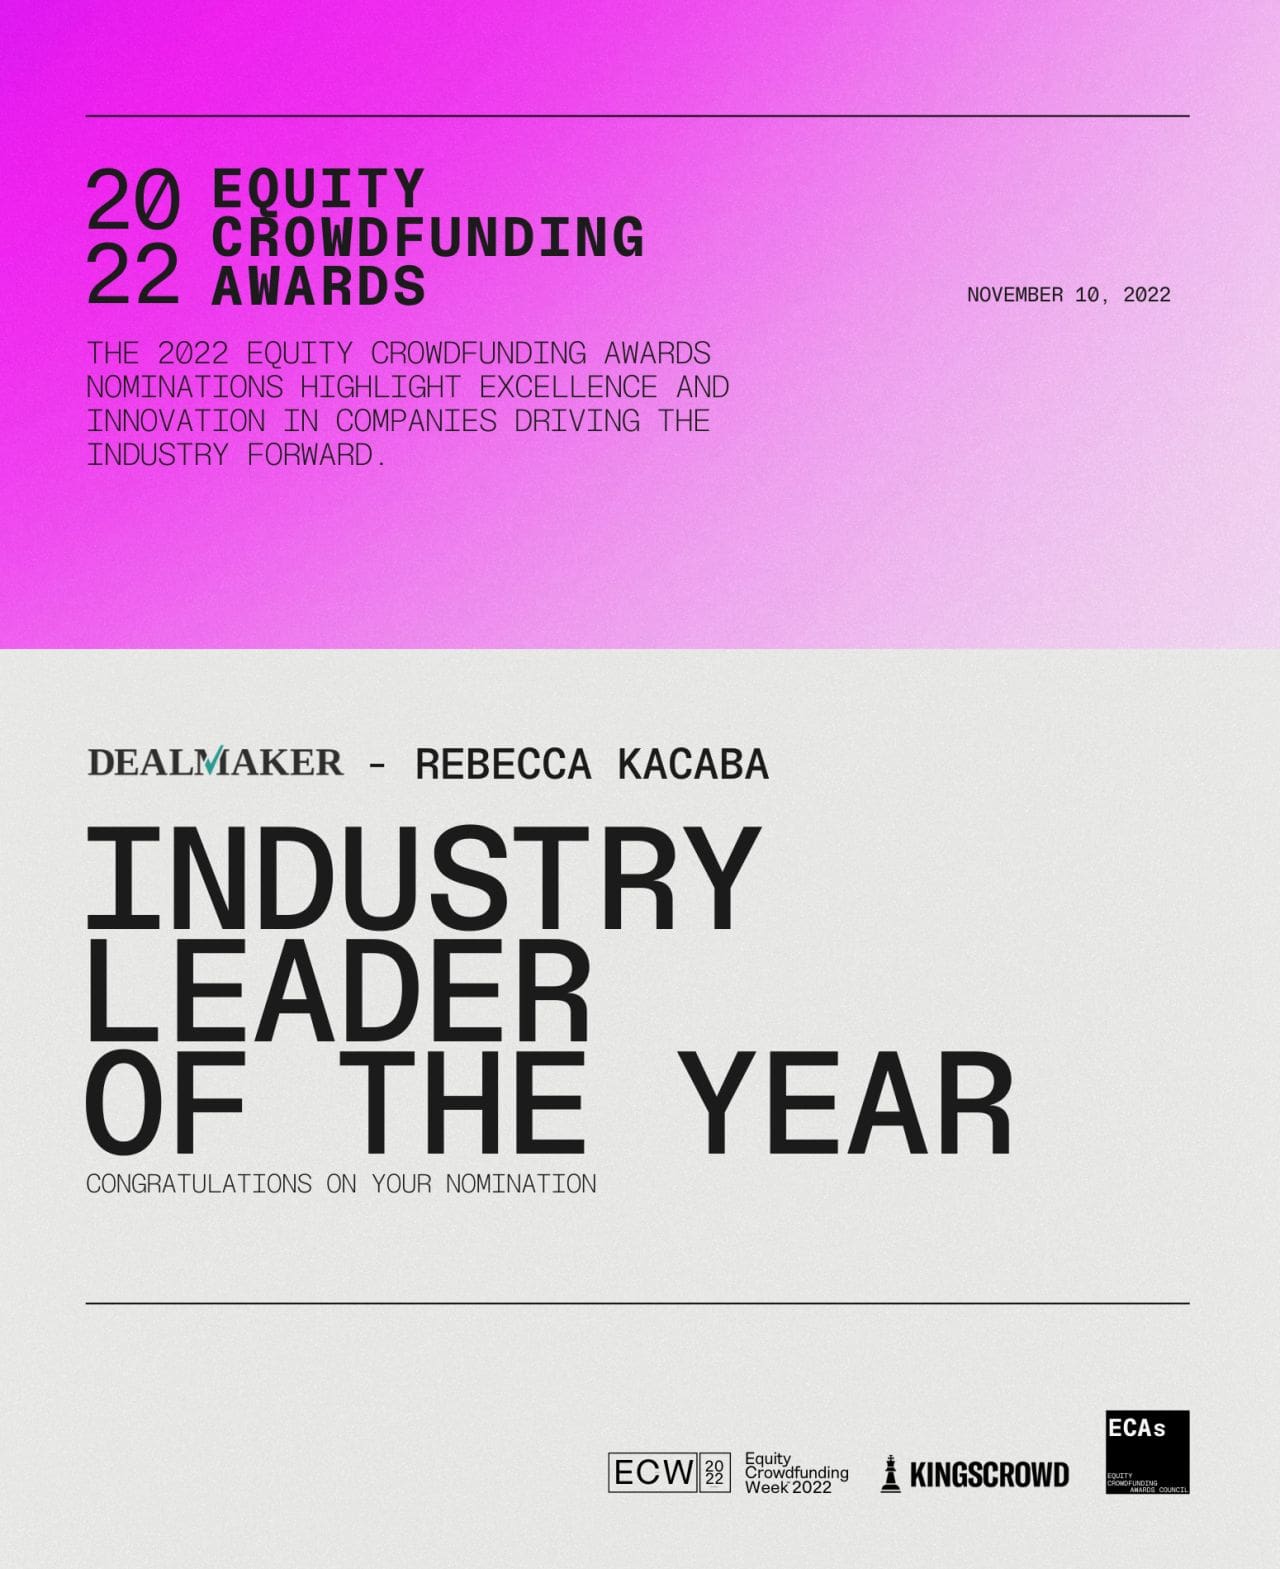 DealMaker CEO and Co-Fouder, Rebecca Kacaba, nominated for Industry Leader of the Year Award